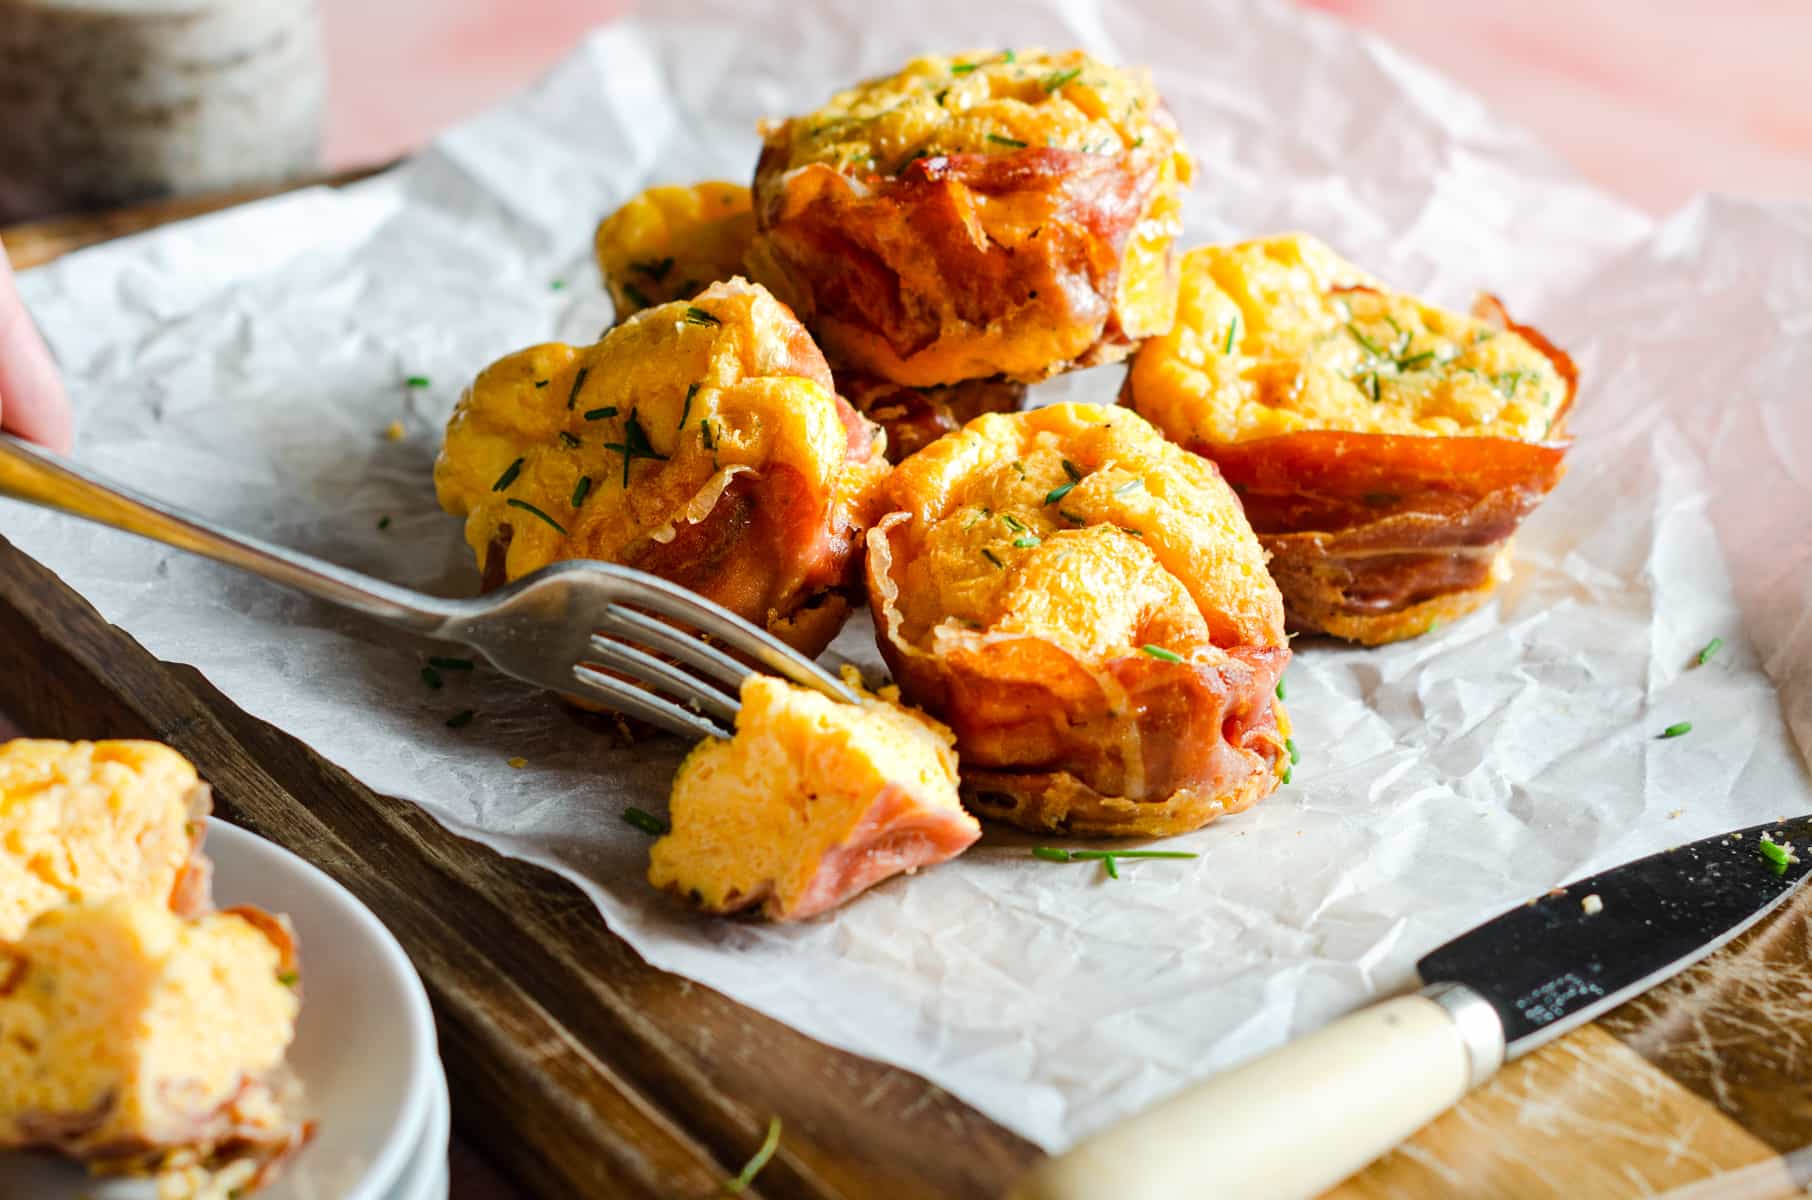 Parma Ham and egg muffins piled on a sheet of baking parchment on a wooden board and a fork cutting into one.